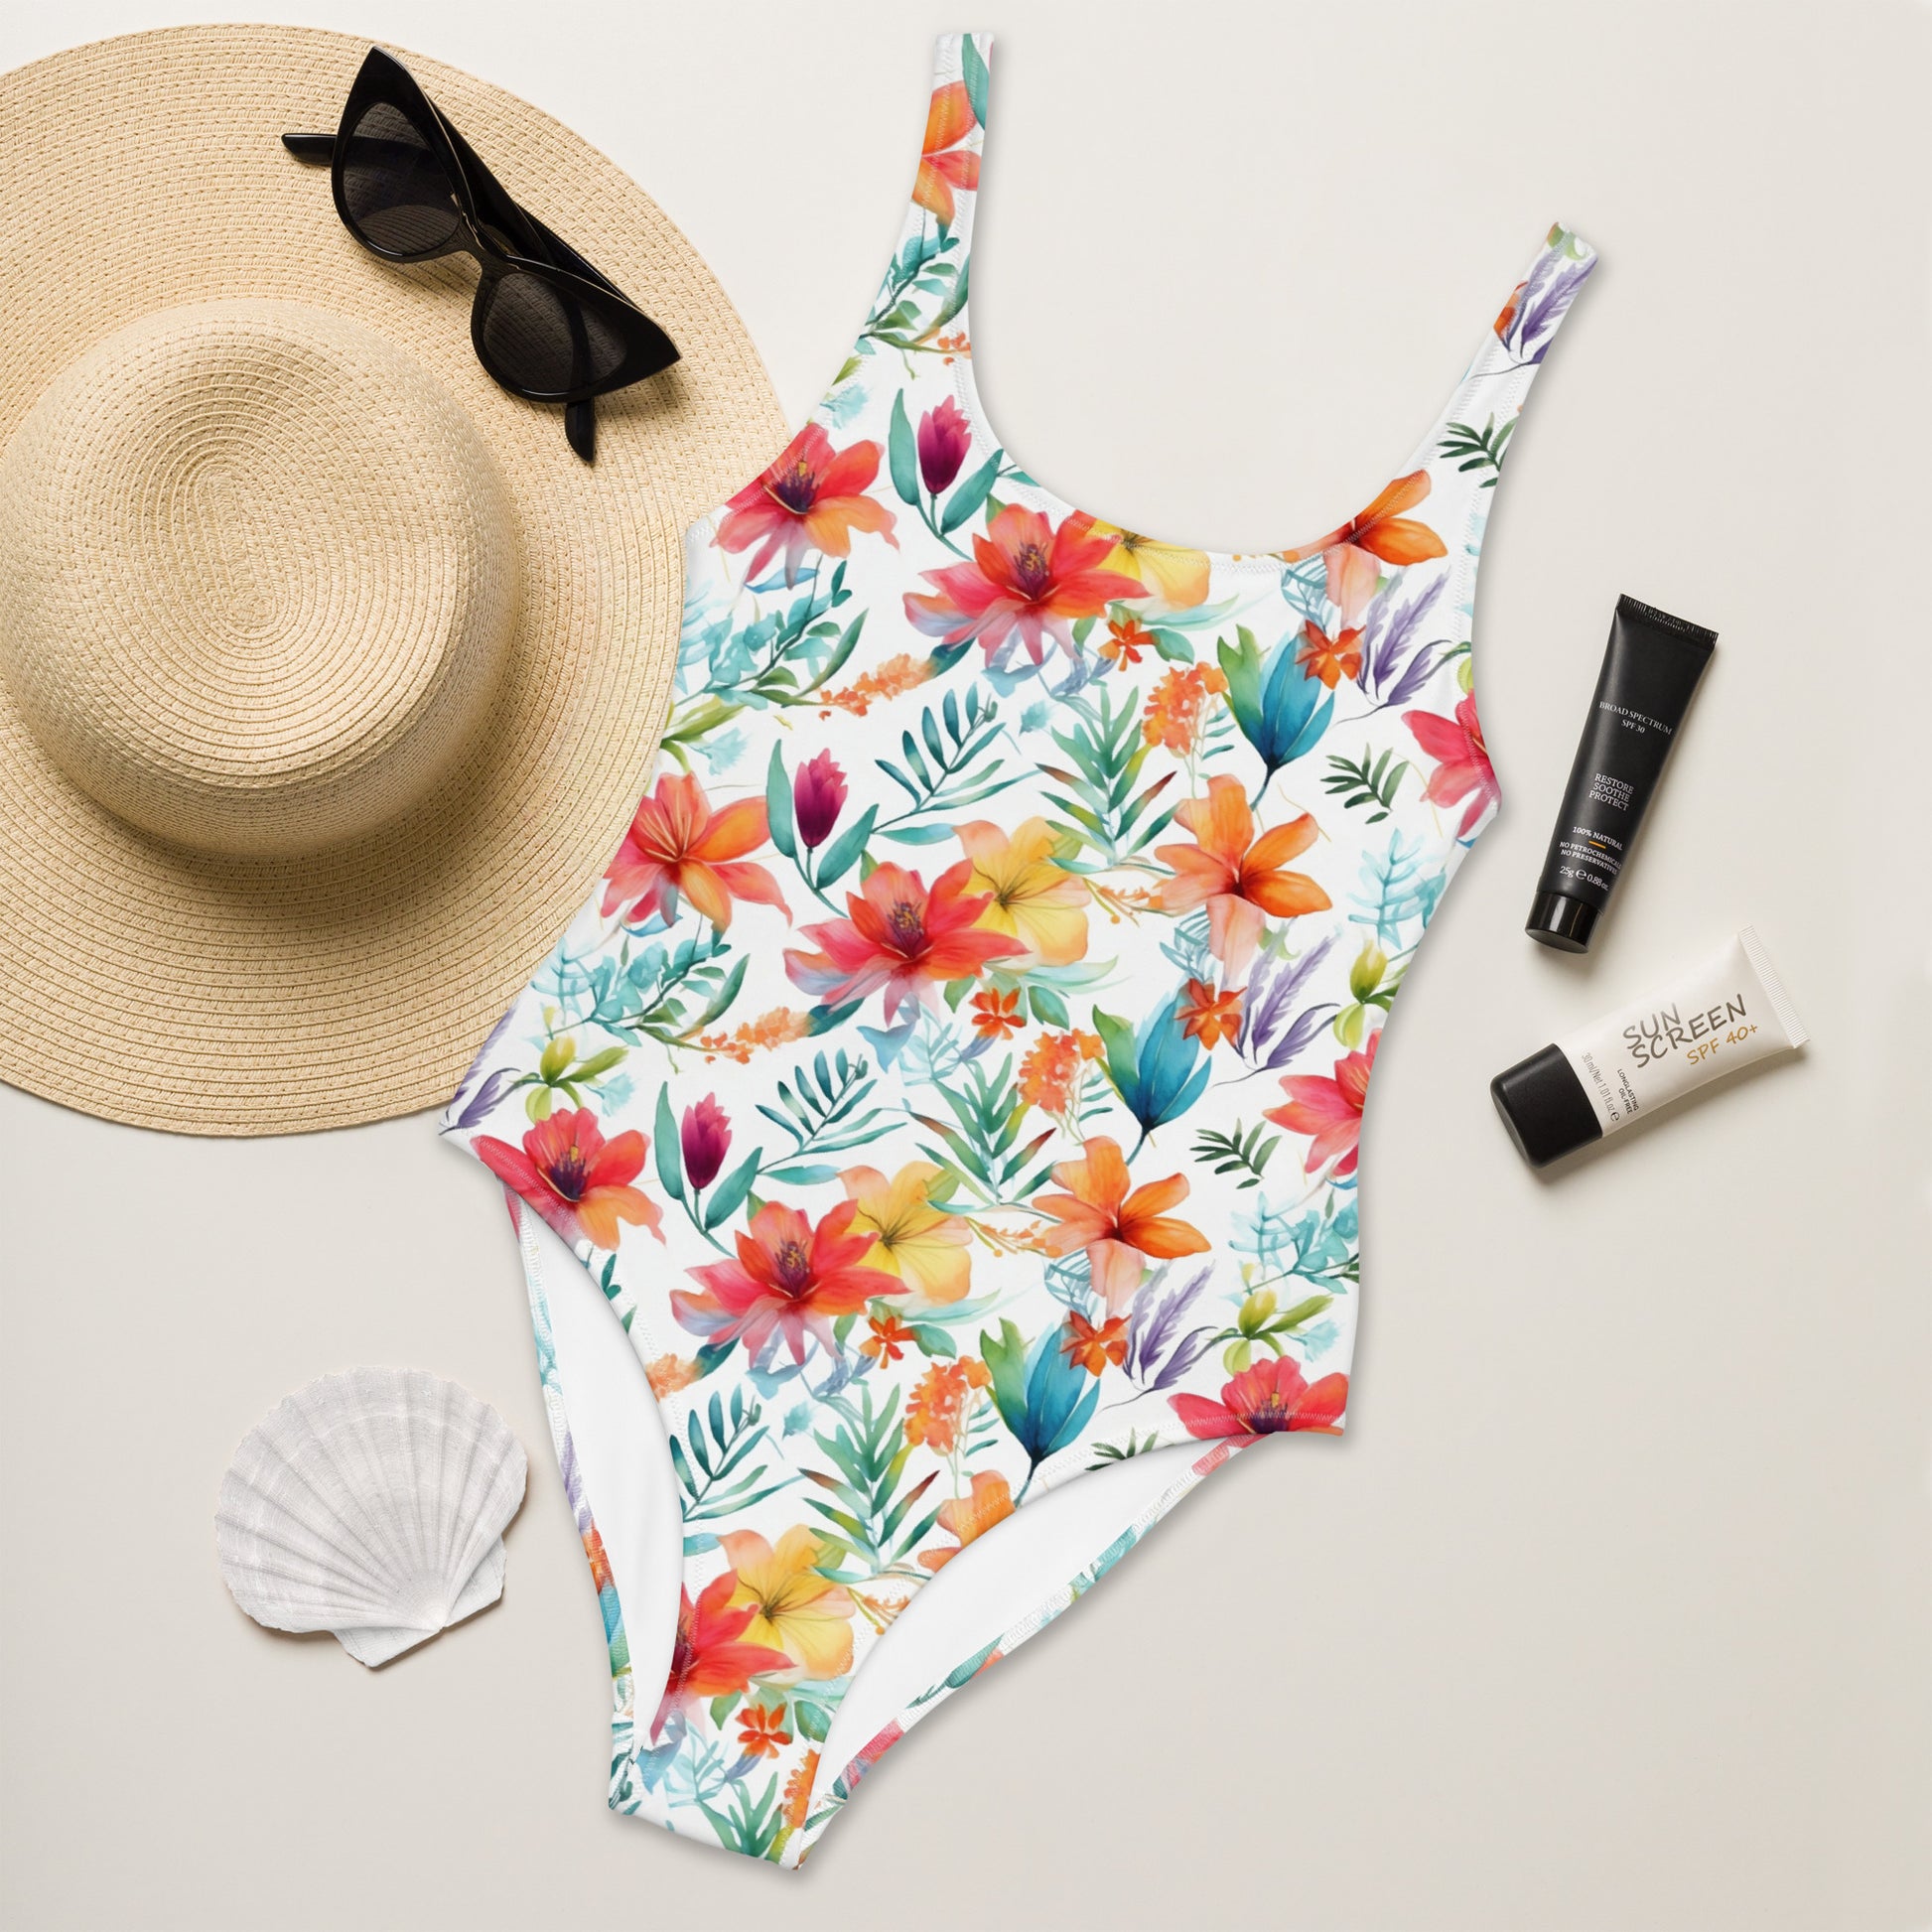 Tropical Flowers One Piece Swimsuit for Women, Cute Floral Watercolor White Designer Swim Swimming Bathing Suits Body Swimwear Starcove Fashion